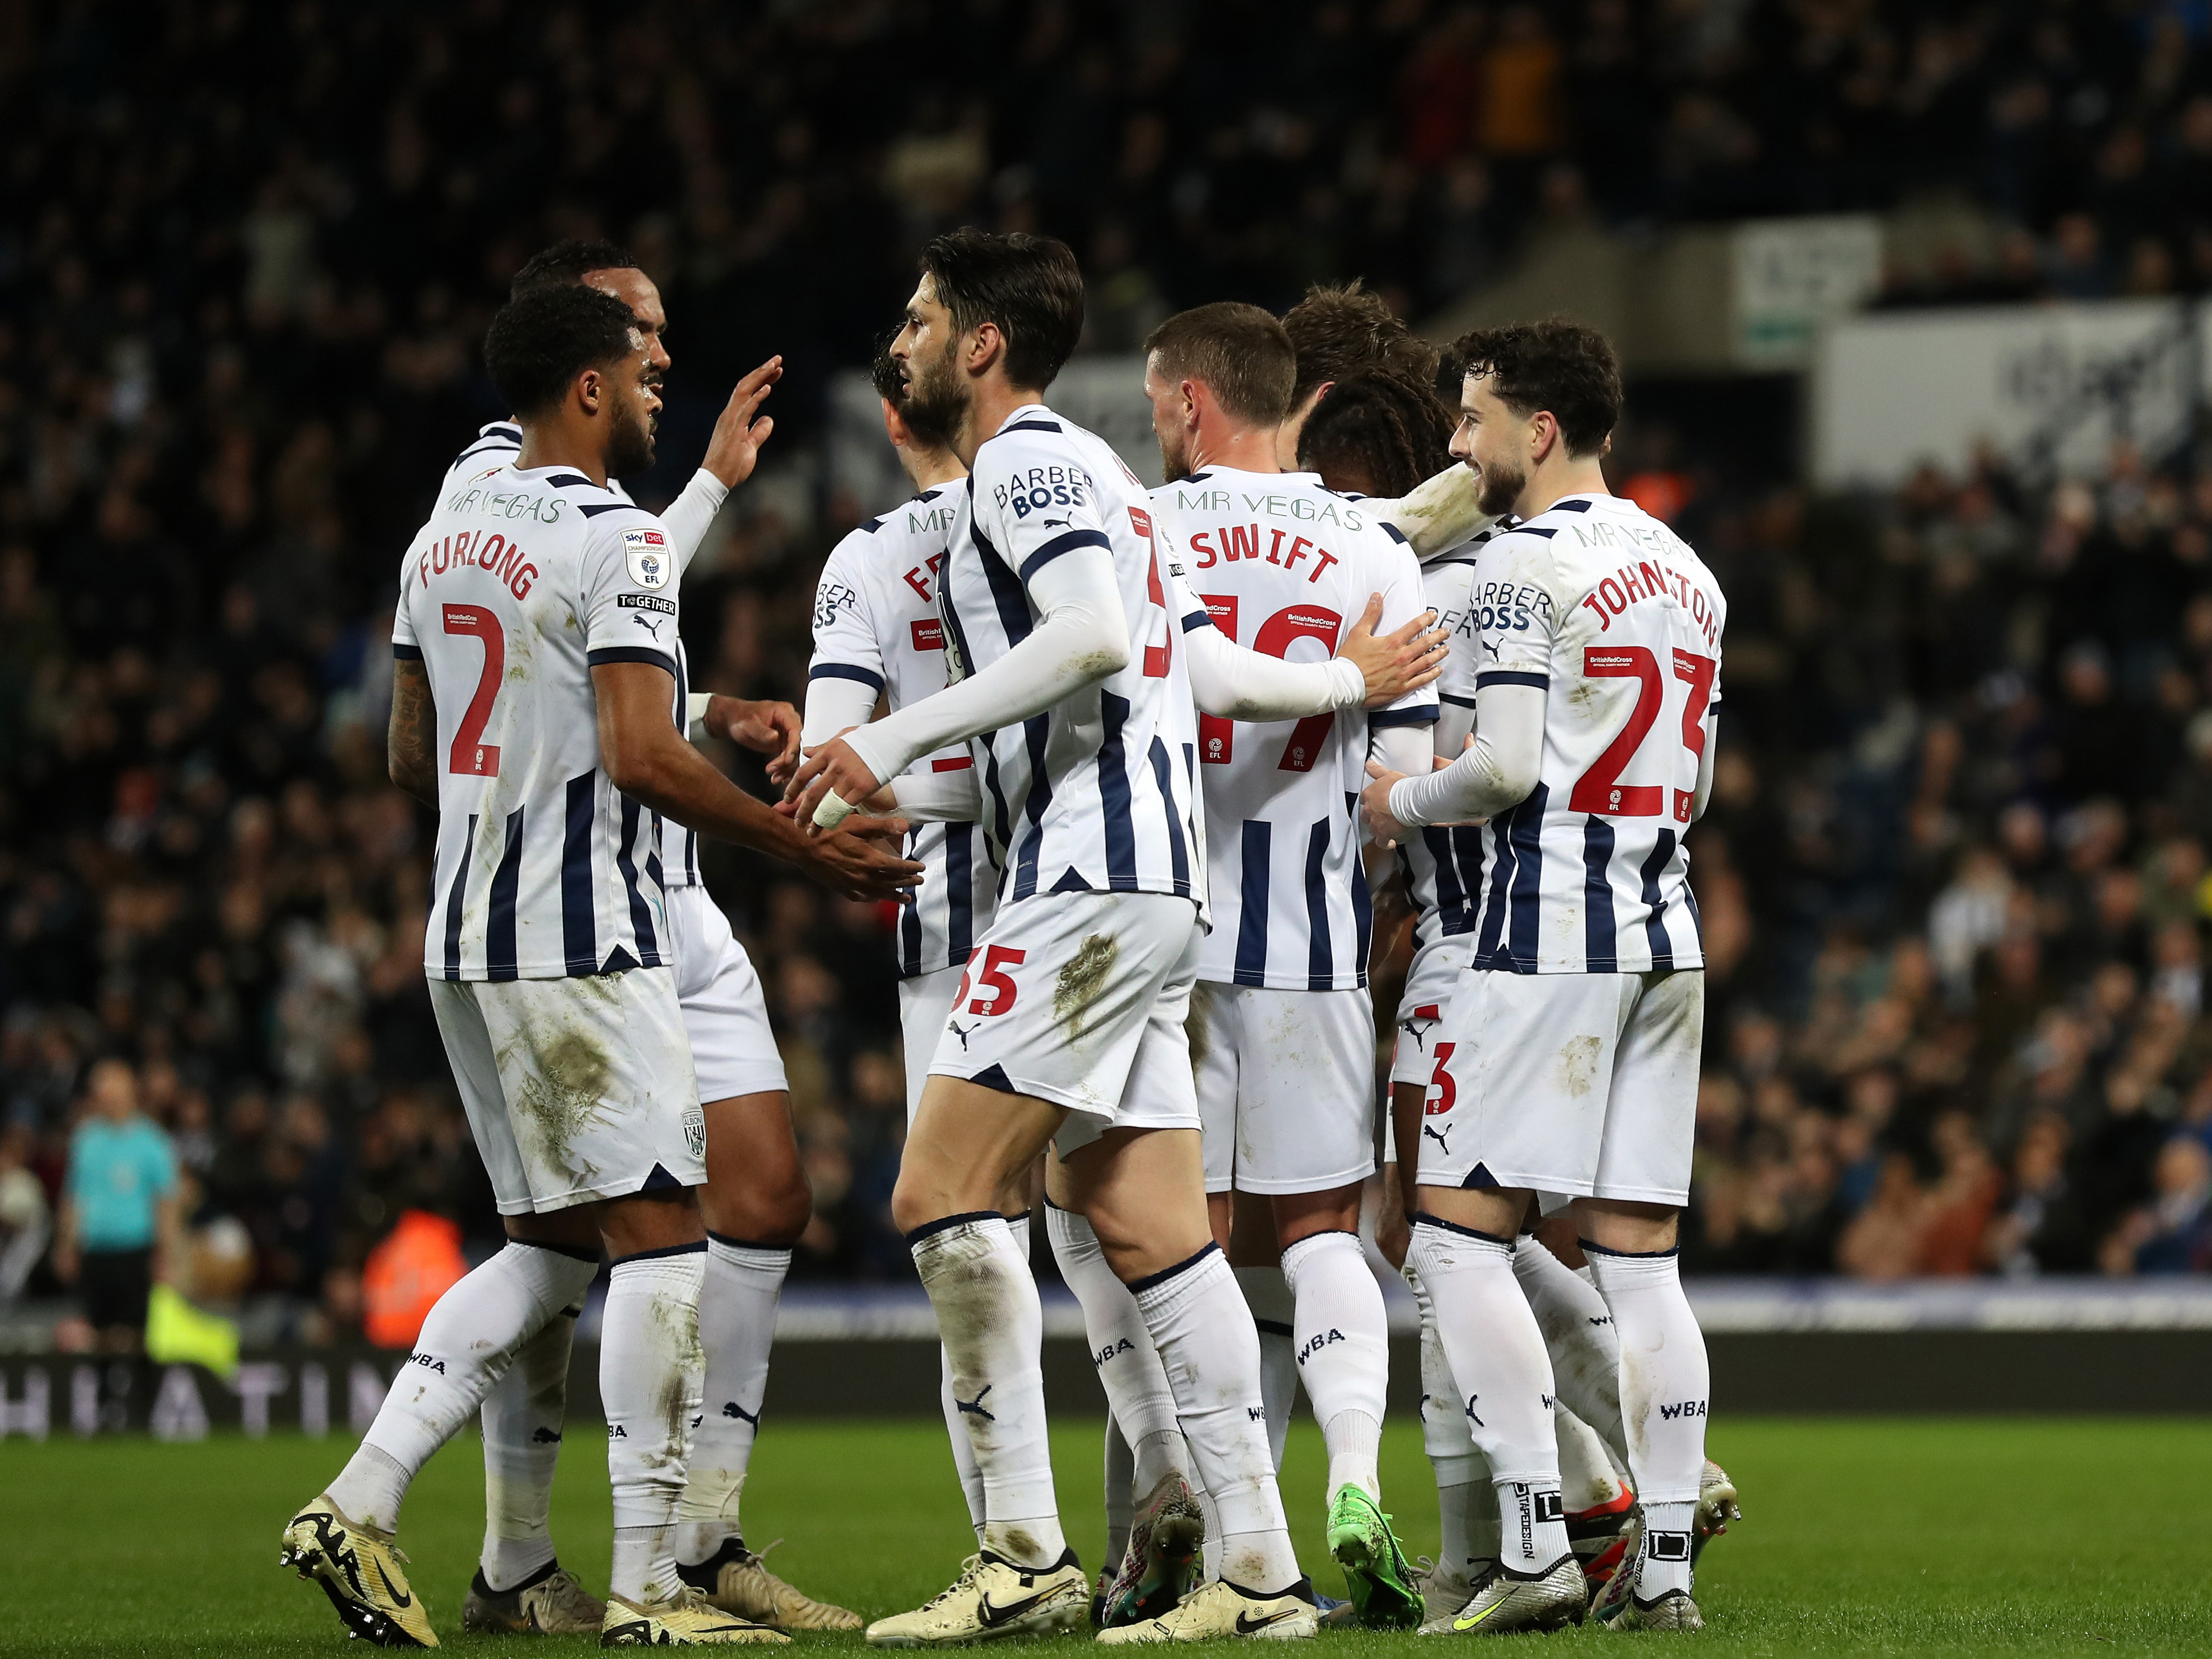 An image of John Swift celebrating with his teammates after scoring against Rotherham